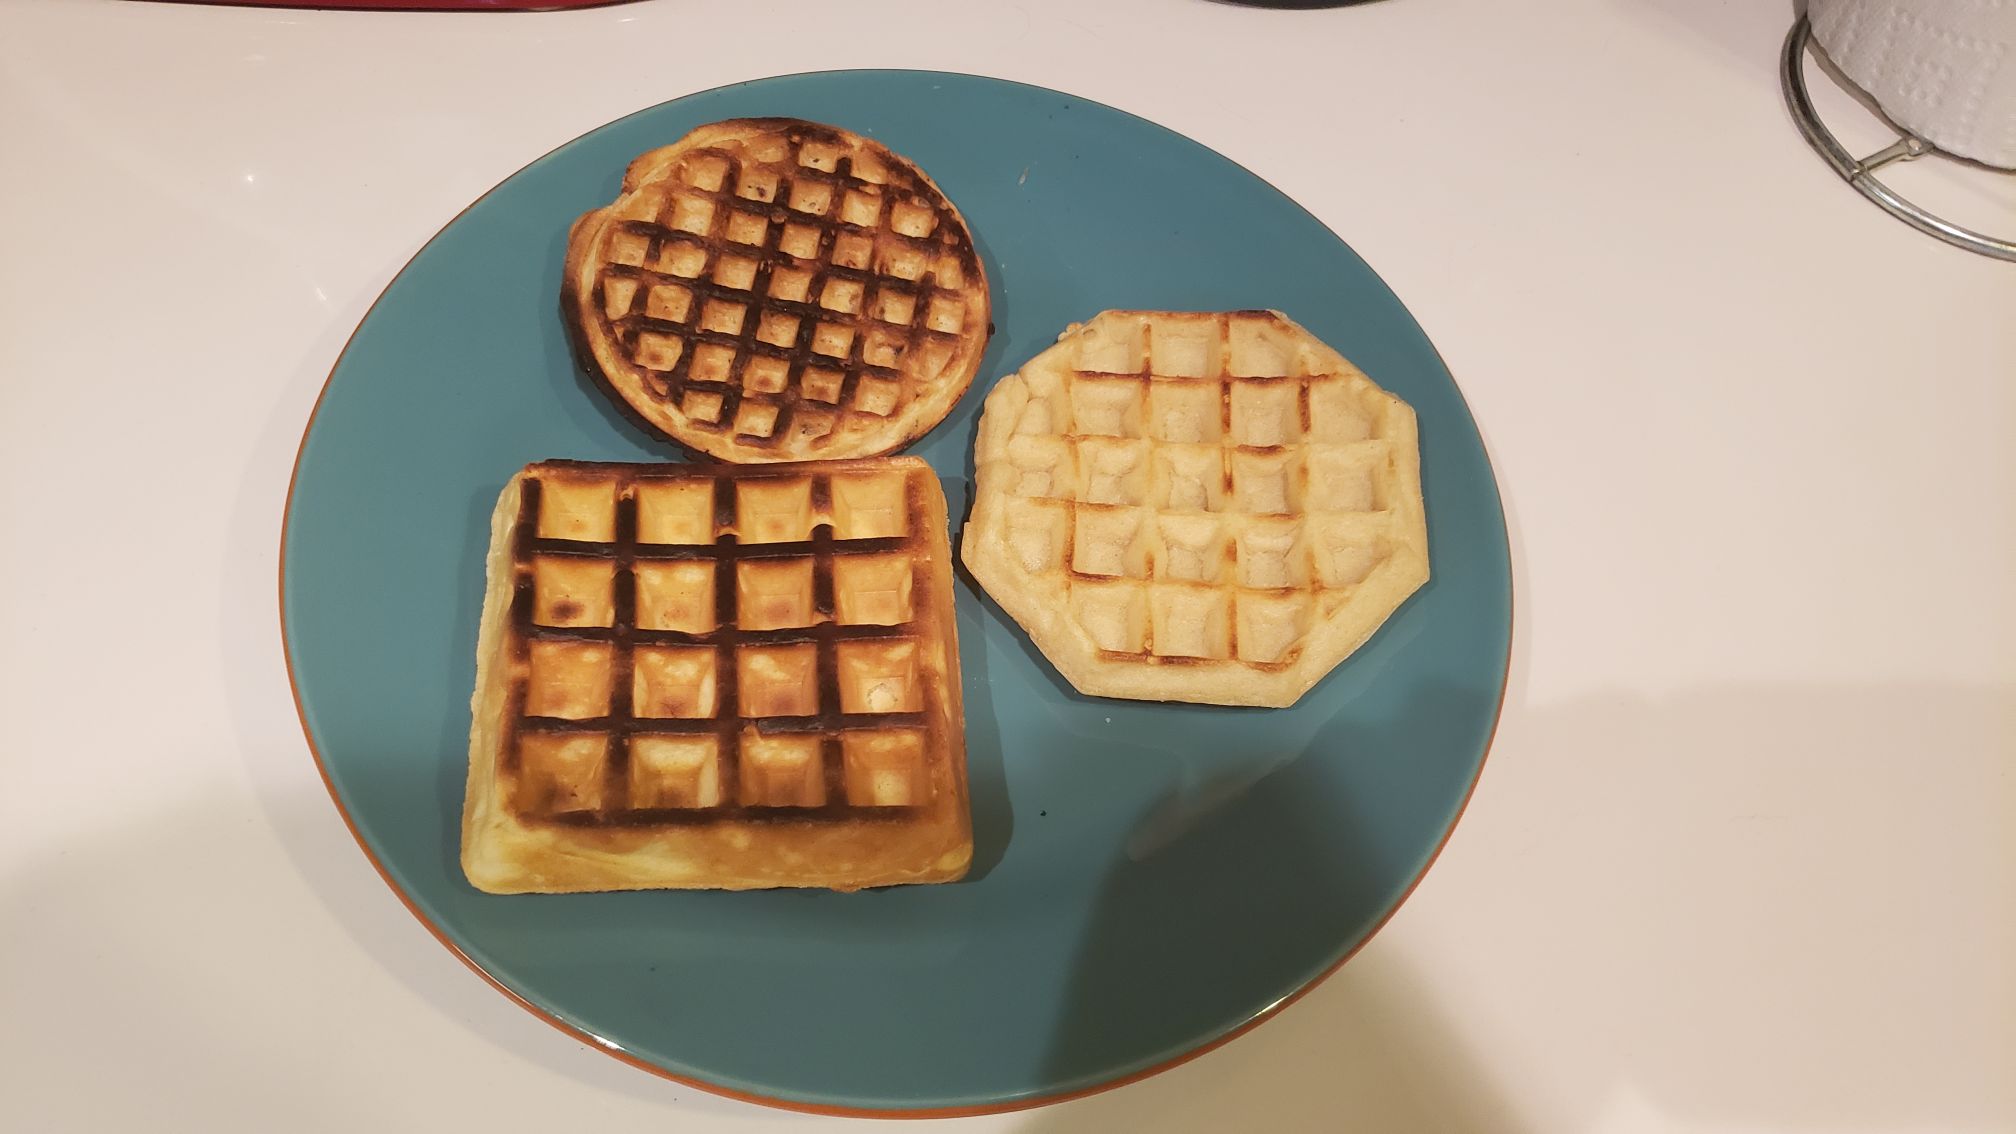 3 types of waffles on a plate, 2 of them are overcooked